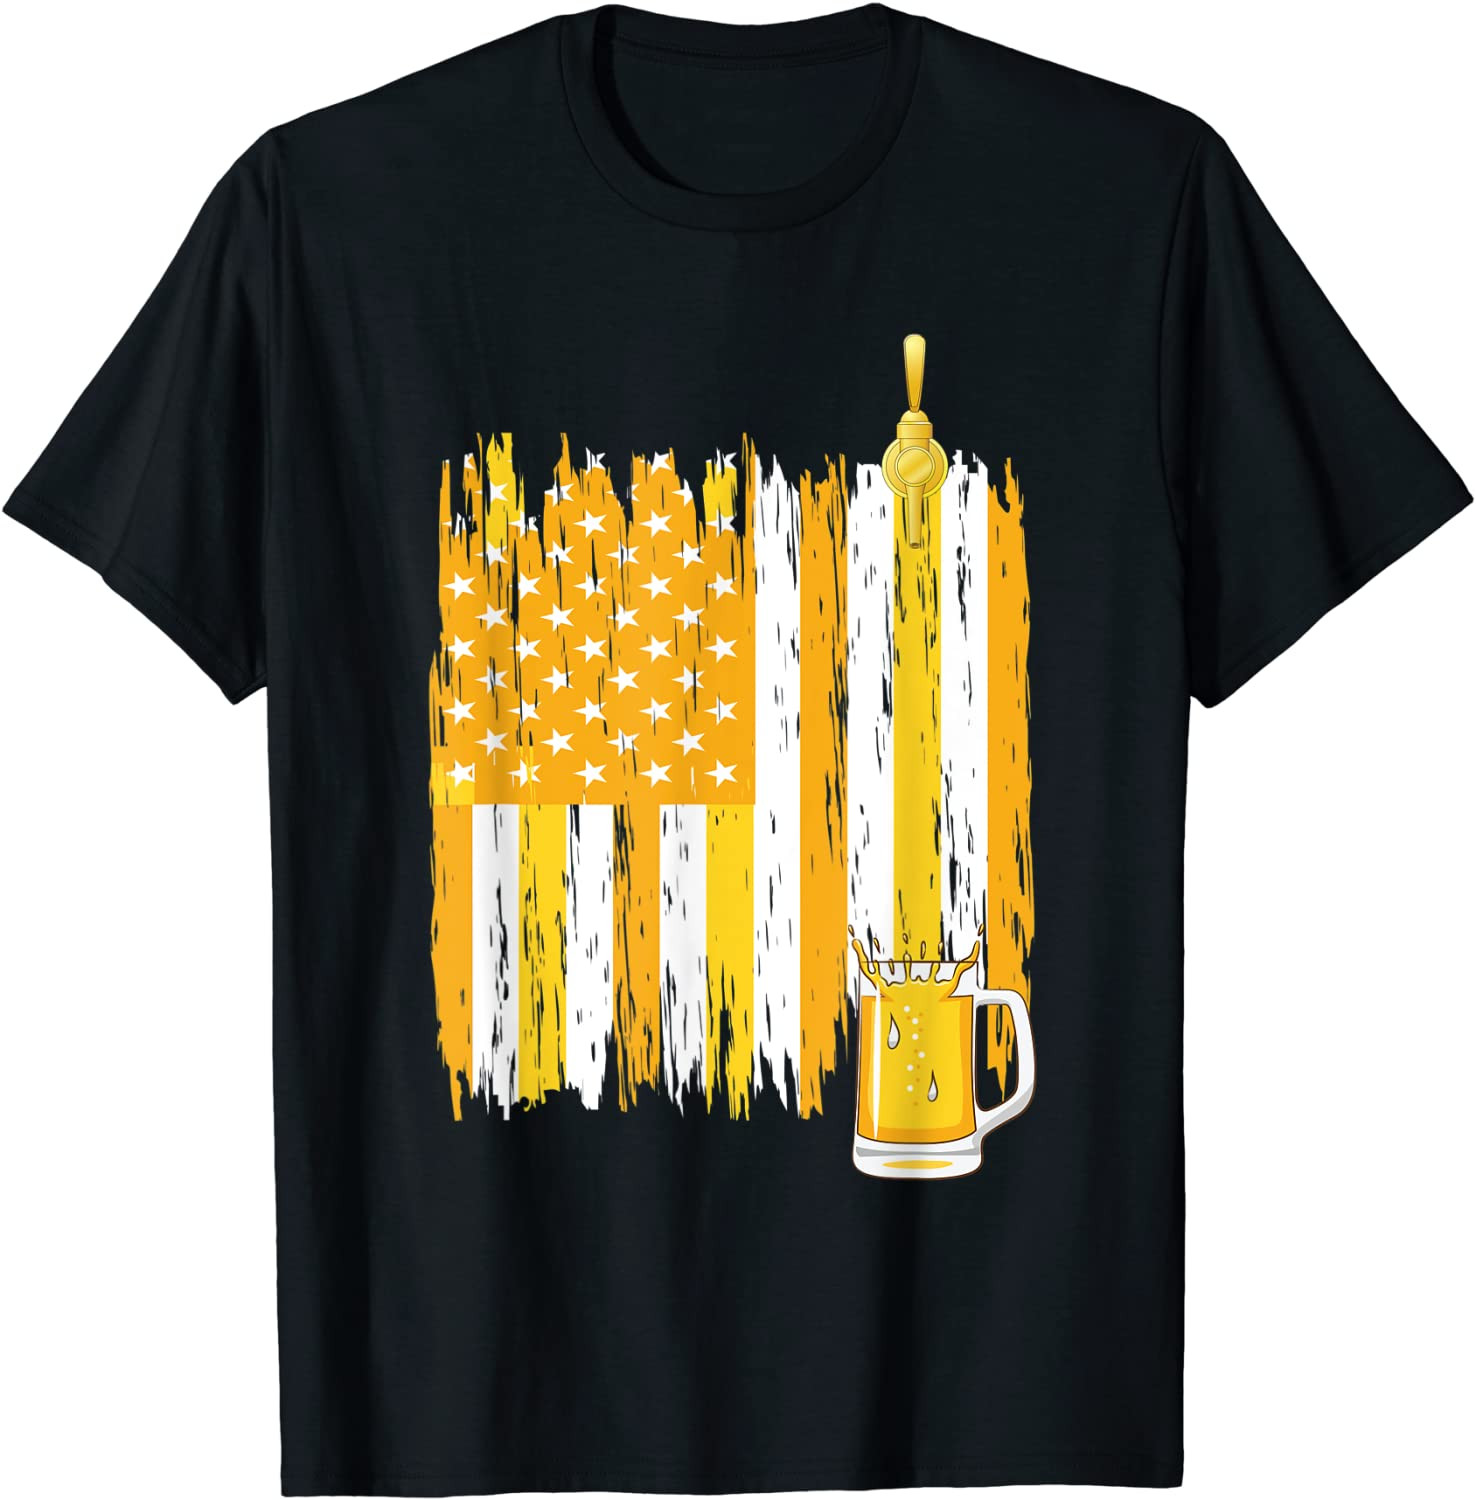 Funny Beer Lovers Drinking Design - USA Flag Beer Glass Gift T-Shirt